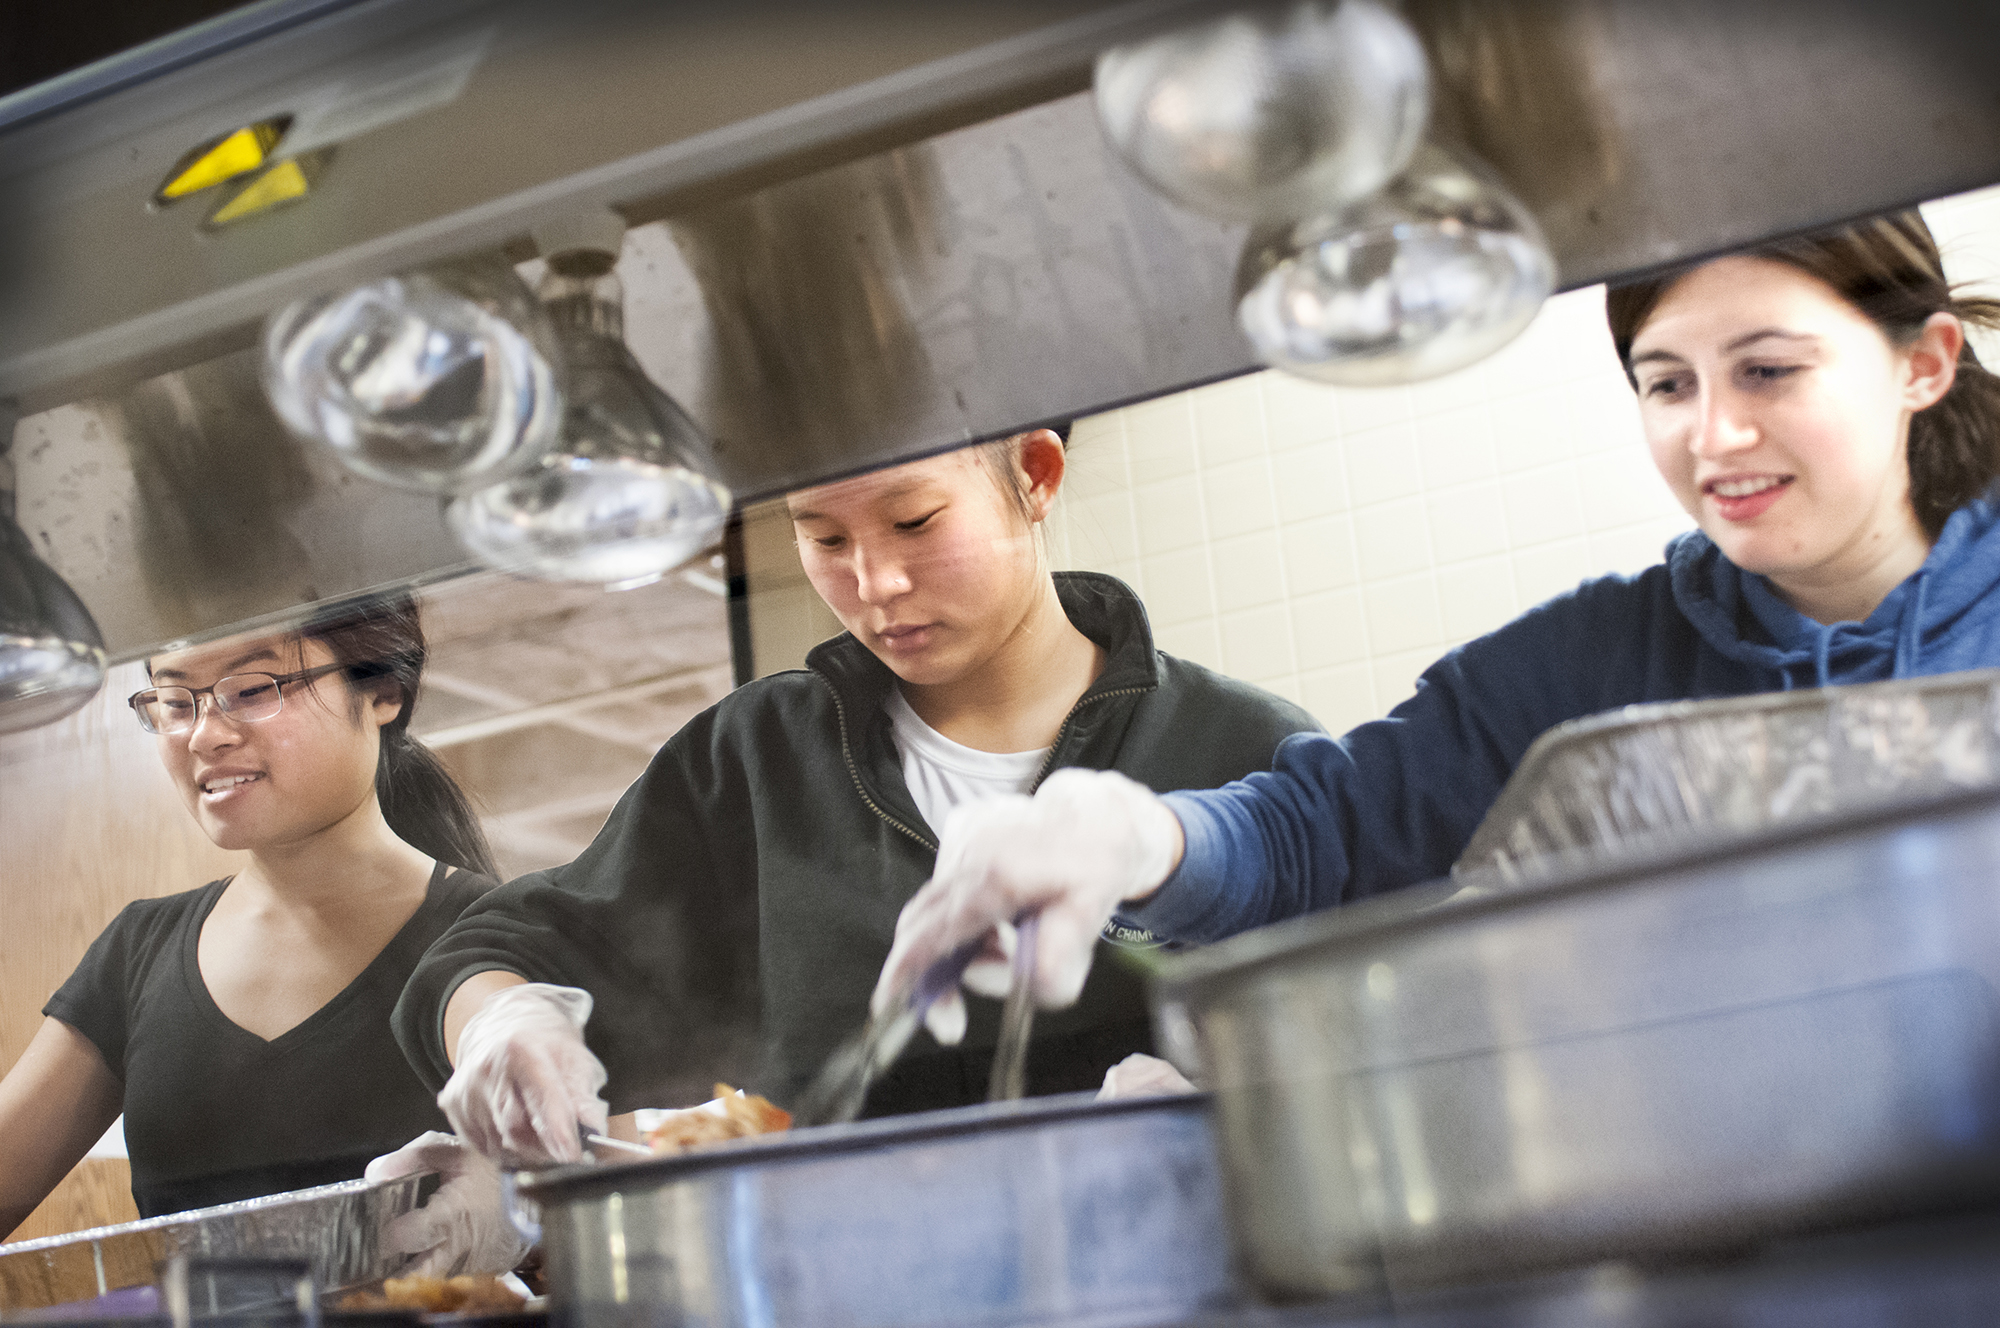 Harvest volunteers Emily Yong '19, Molly Clark '19 and Caitlin Anthony '19 pack food in McEwen.